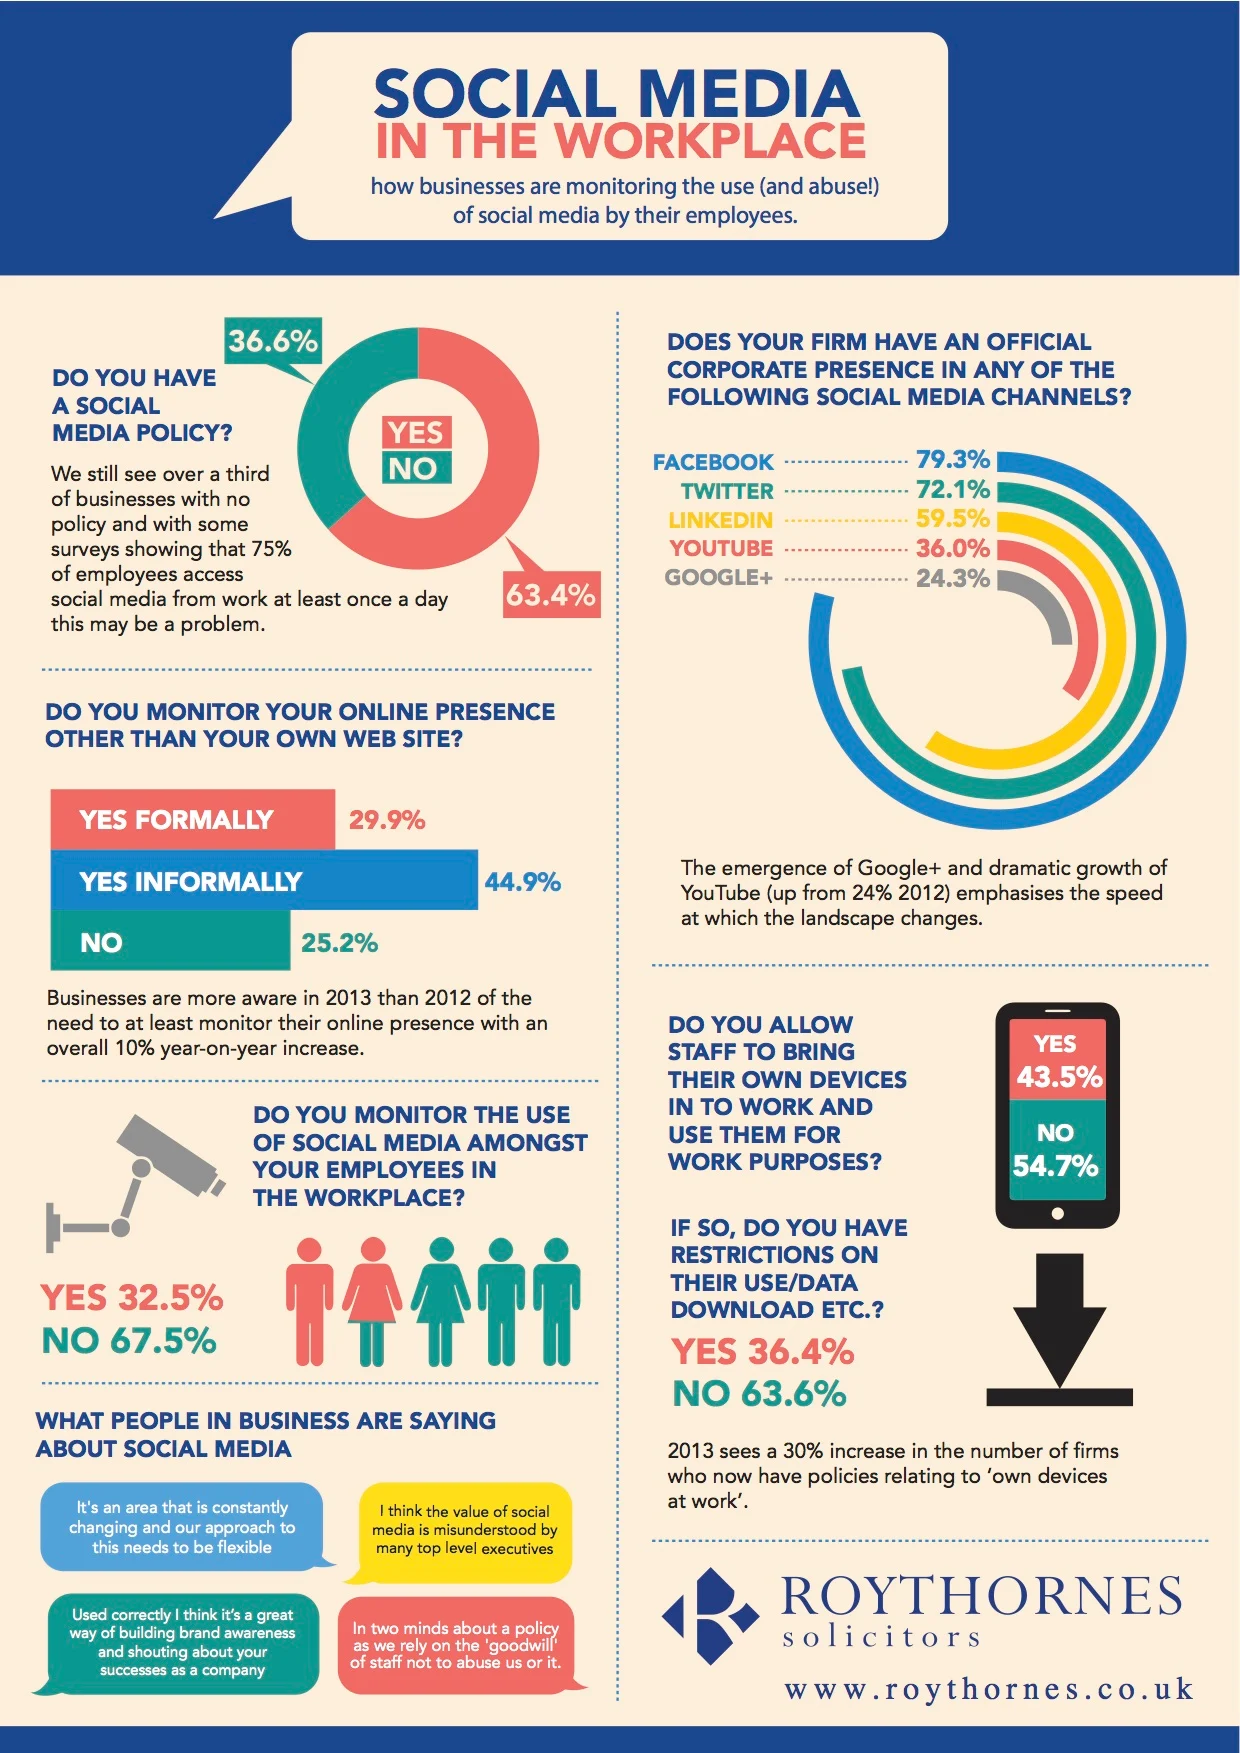 How Businesses are Monitoring the Use and Abuse of Social Media by Their Employees [INFOGRAPHIC]